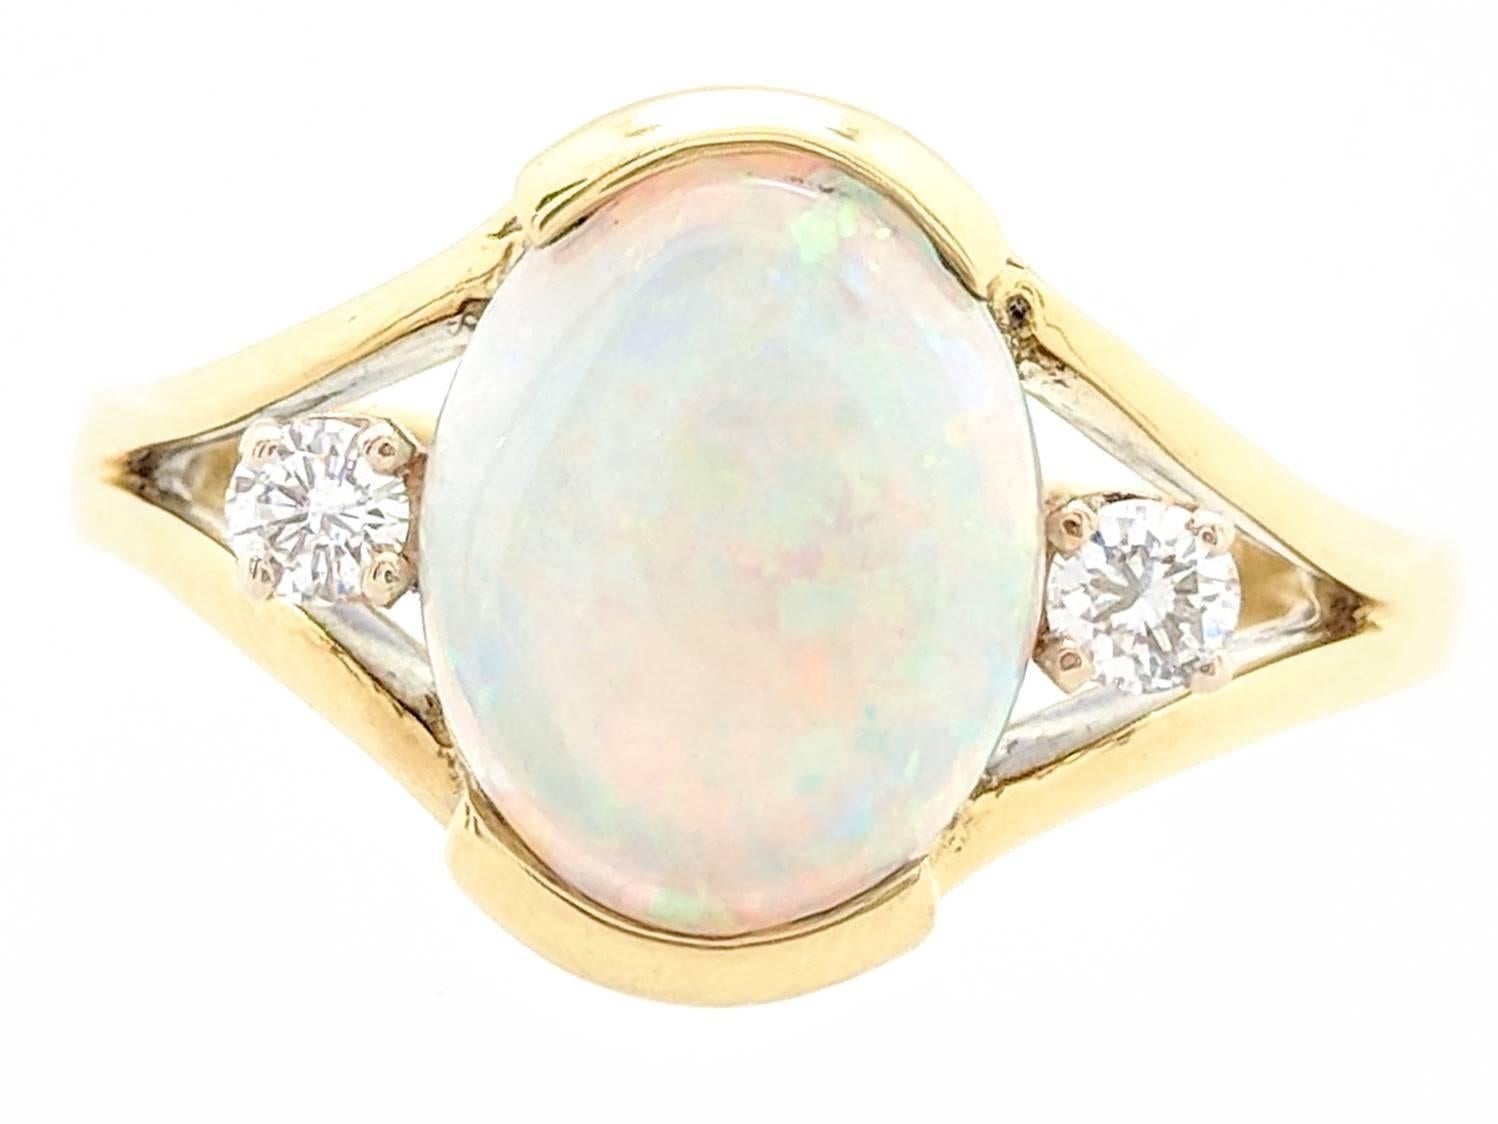 18k Yellow Gold 1.65ct Oval Shaped Natural Opal & Diamond Ring Size 5.5
Ring is crafted from 18k yellow gold and weighs 6 grams.  It features one (1) 1.65ct natural oval shaped opal and (2) .05ct natural round diamonds. This ring is currently a size